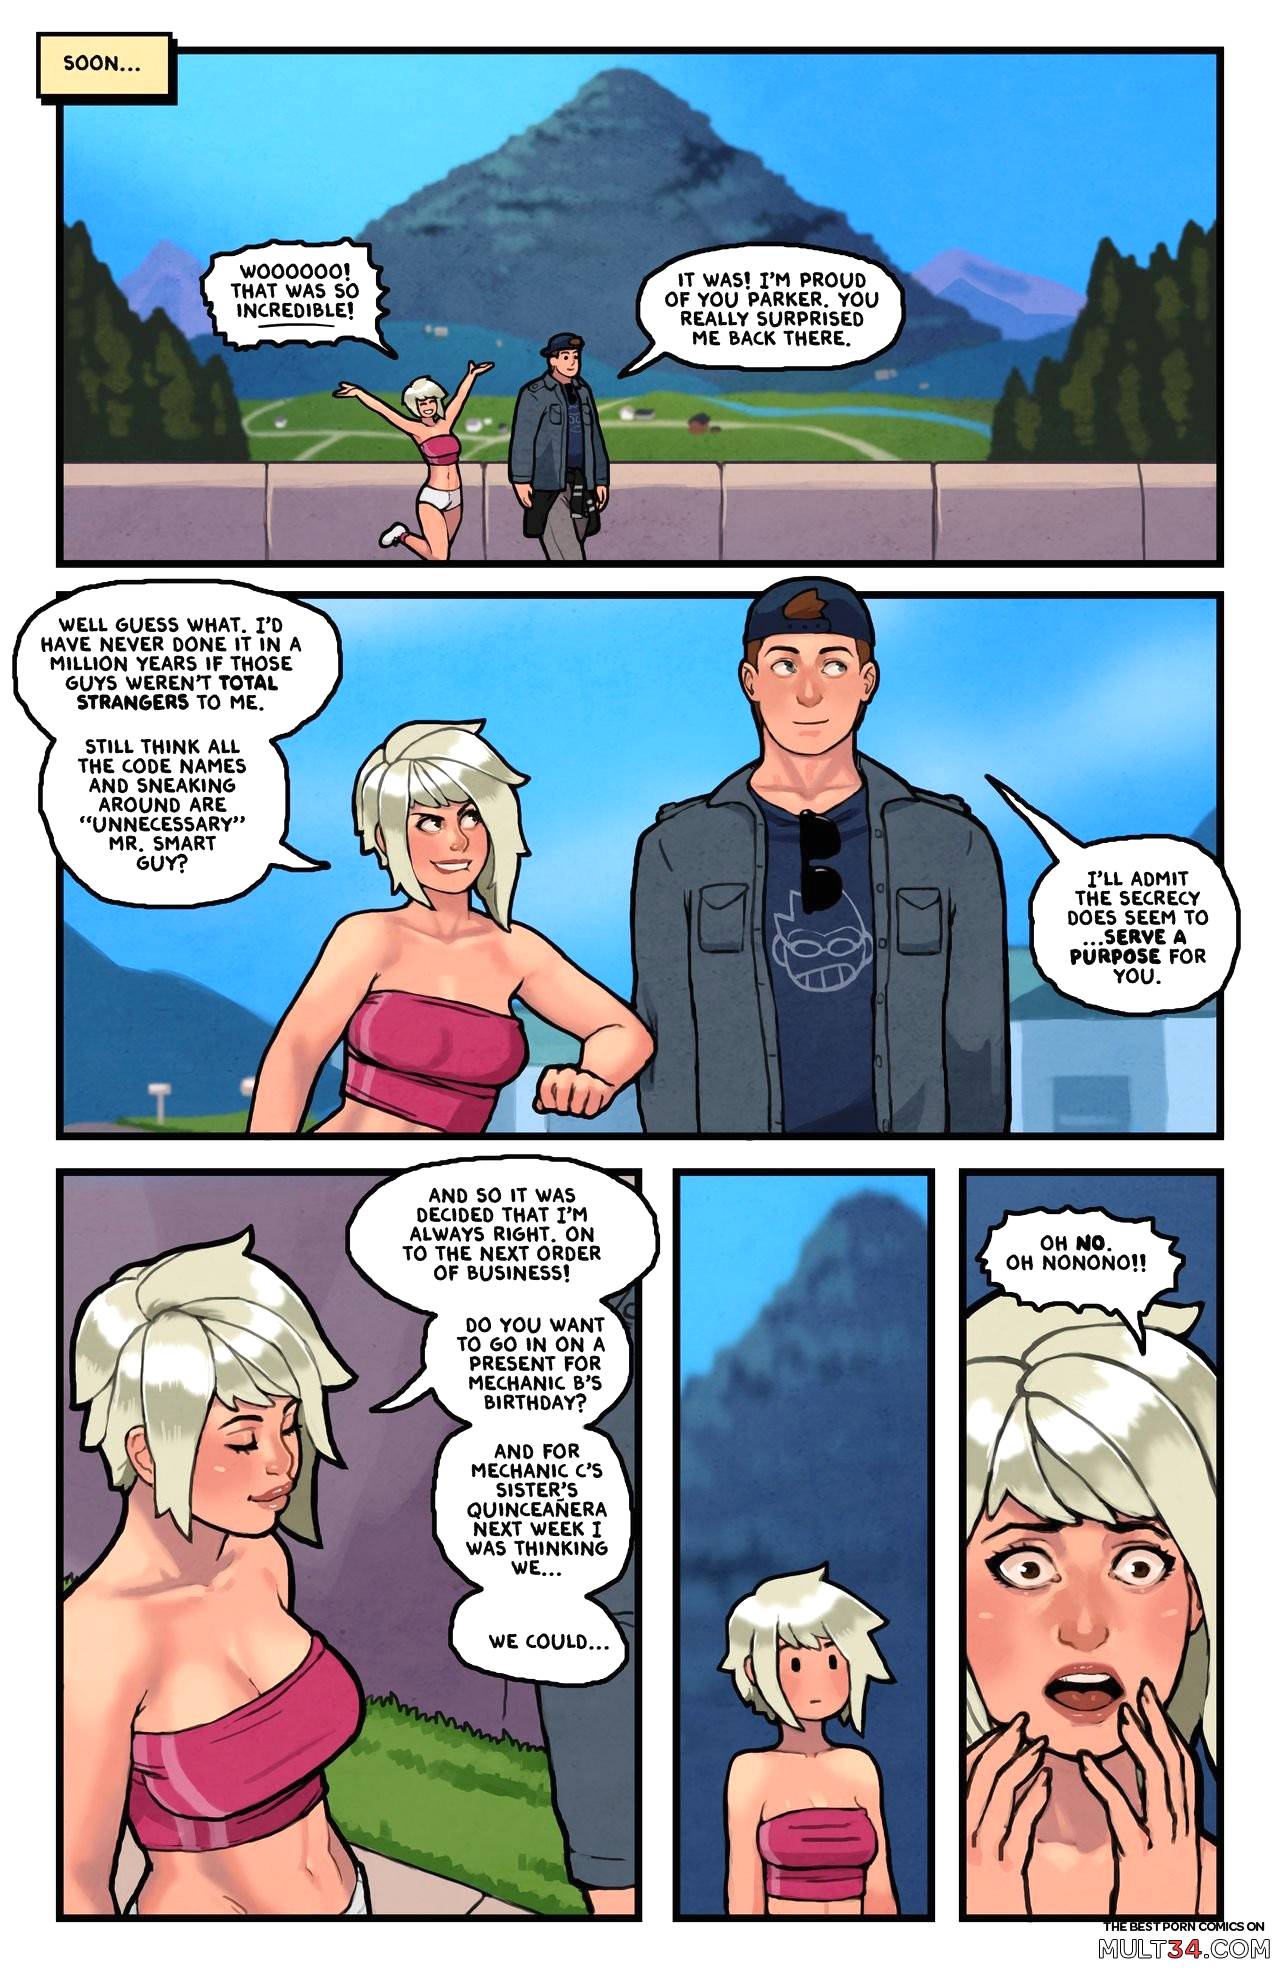 This Romantic World 6 page 10